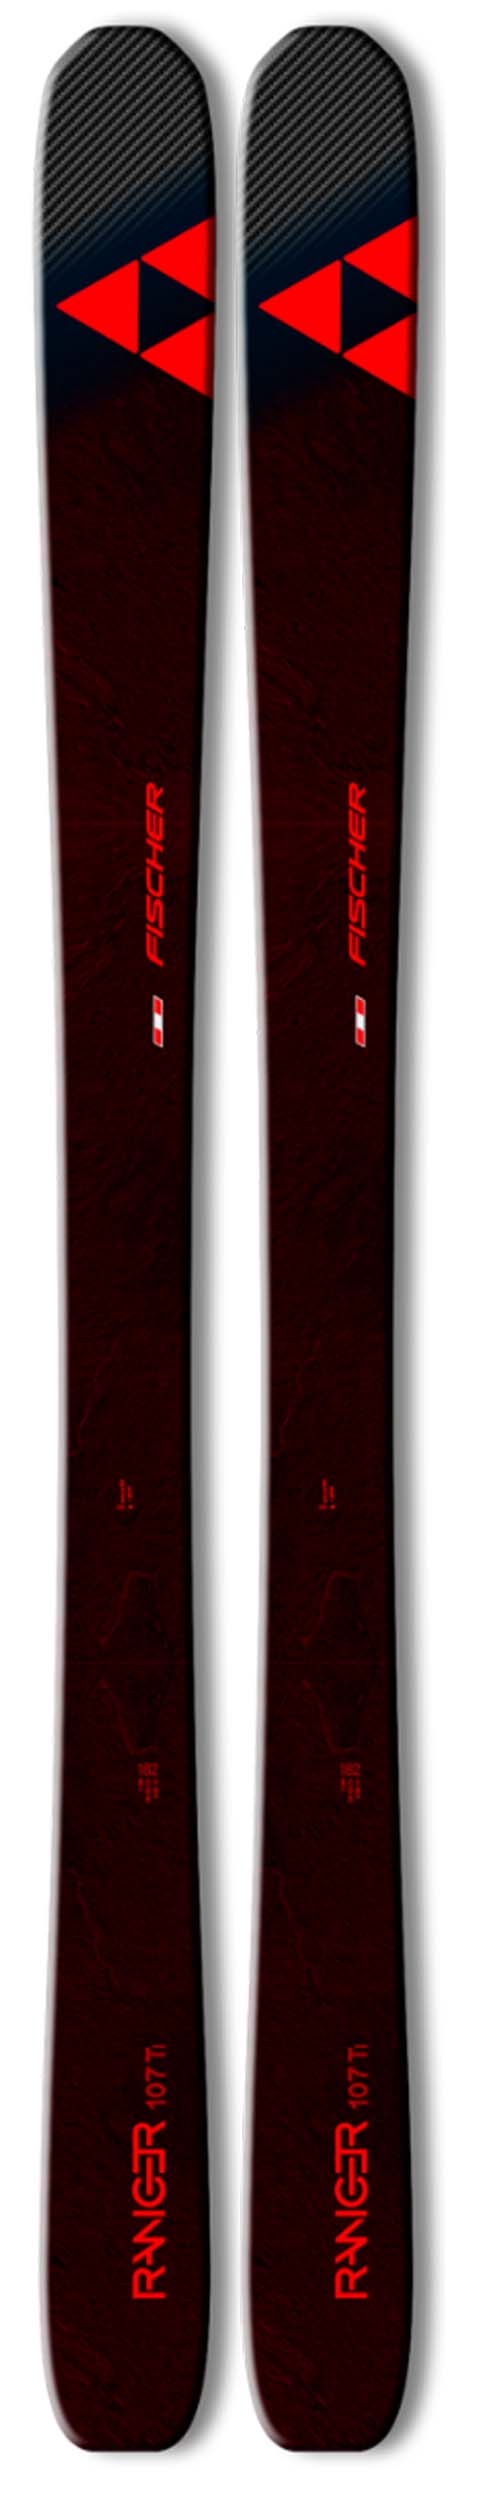 Fischer 2022 Ranger 107 Ti Skis (Without Bindings / Flat) NEW !! 175cm